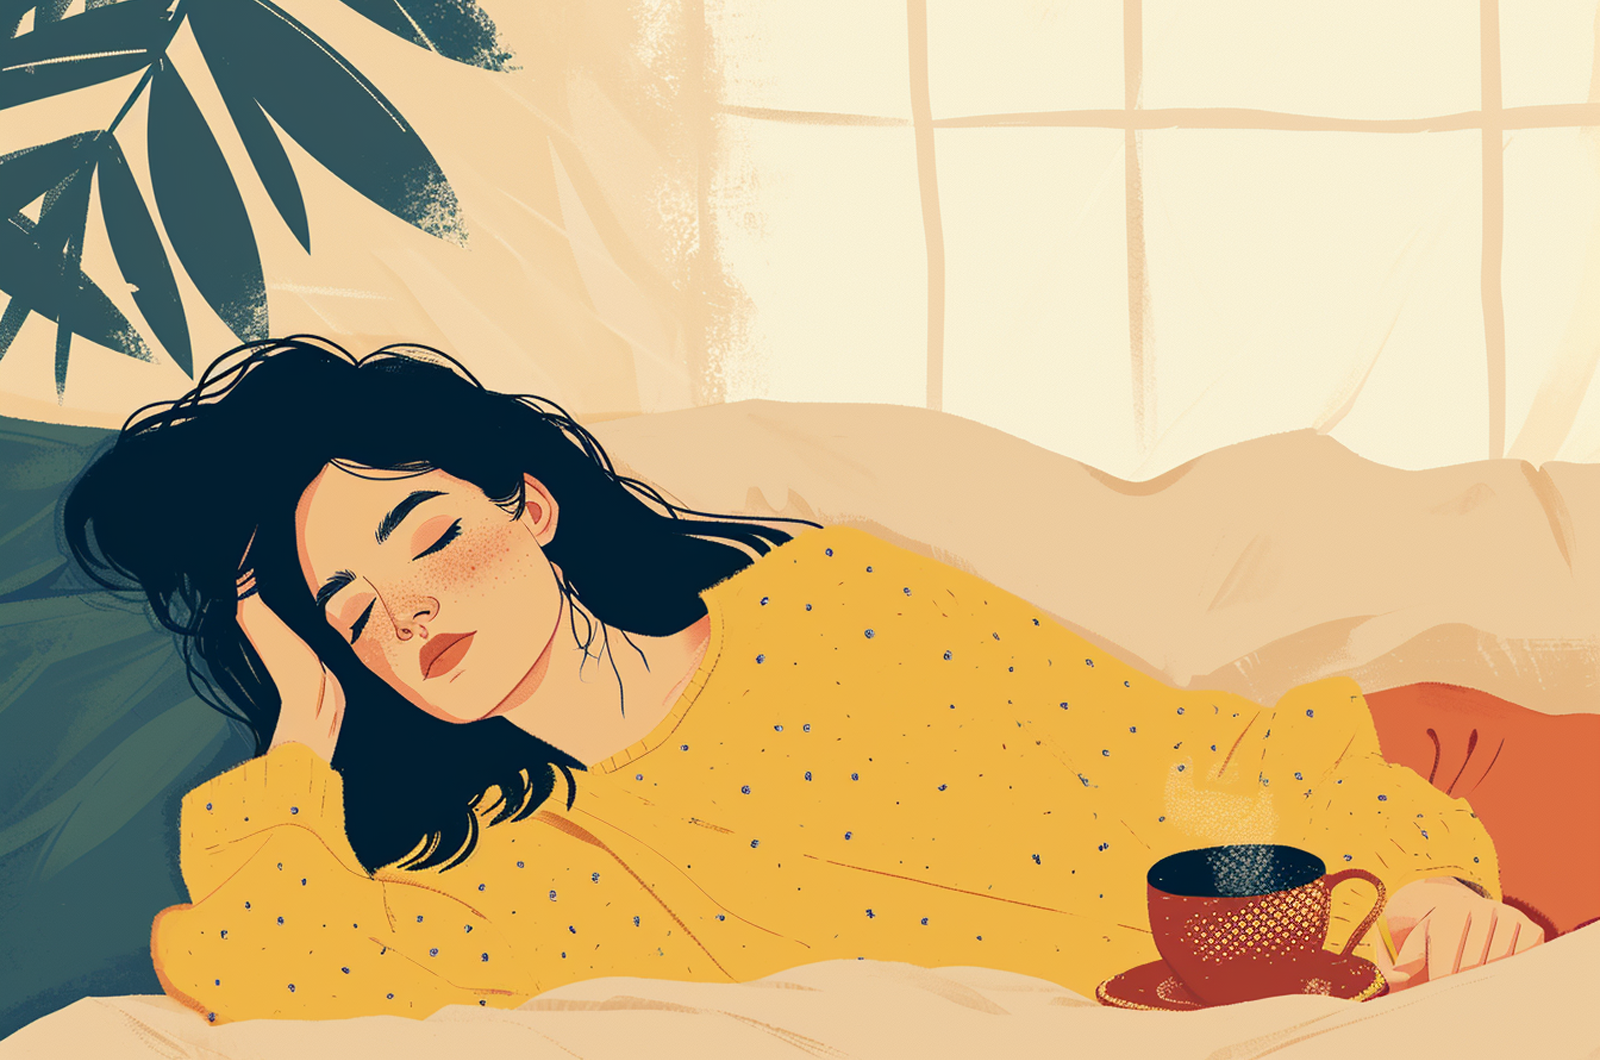 Peaceful woman asleep in bed with a comforting hot drink by her side